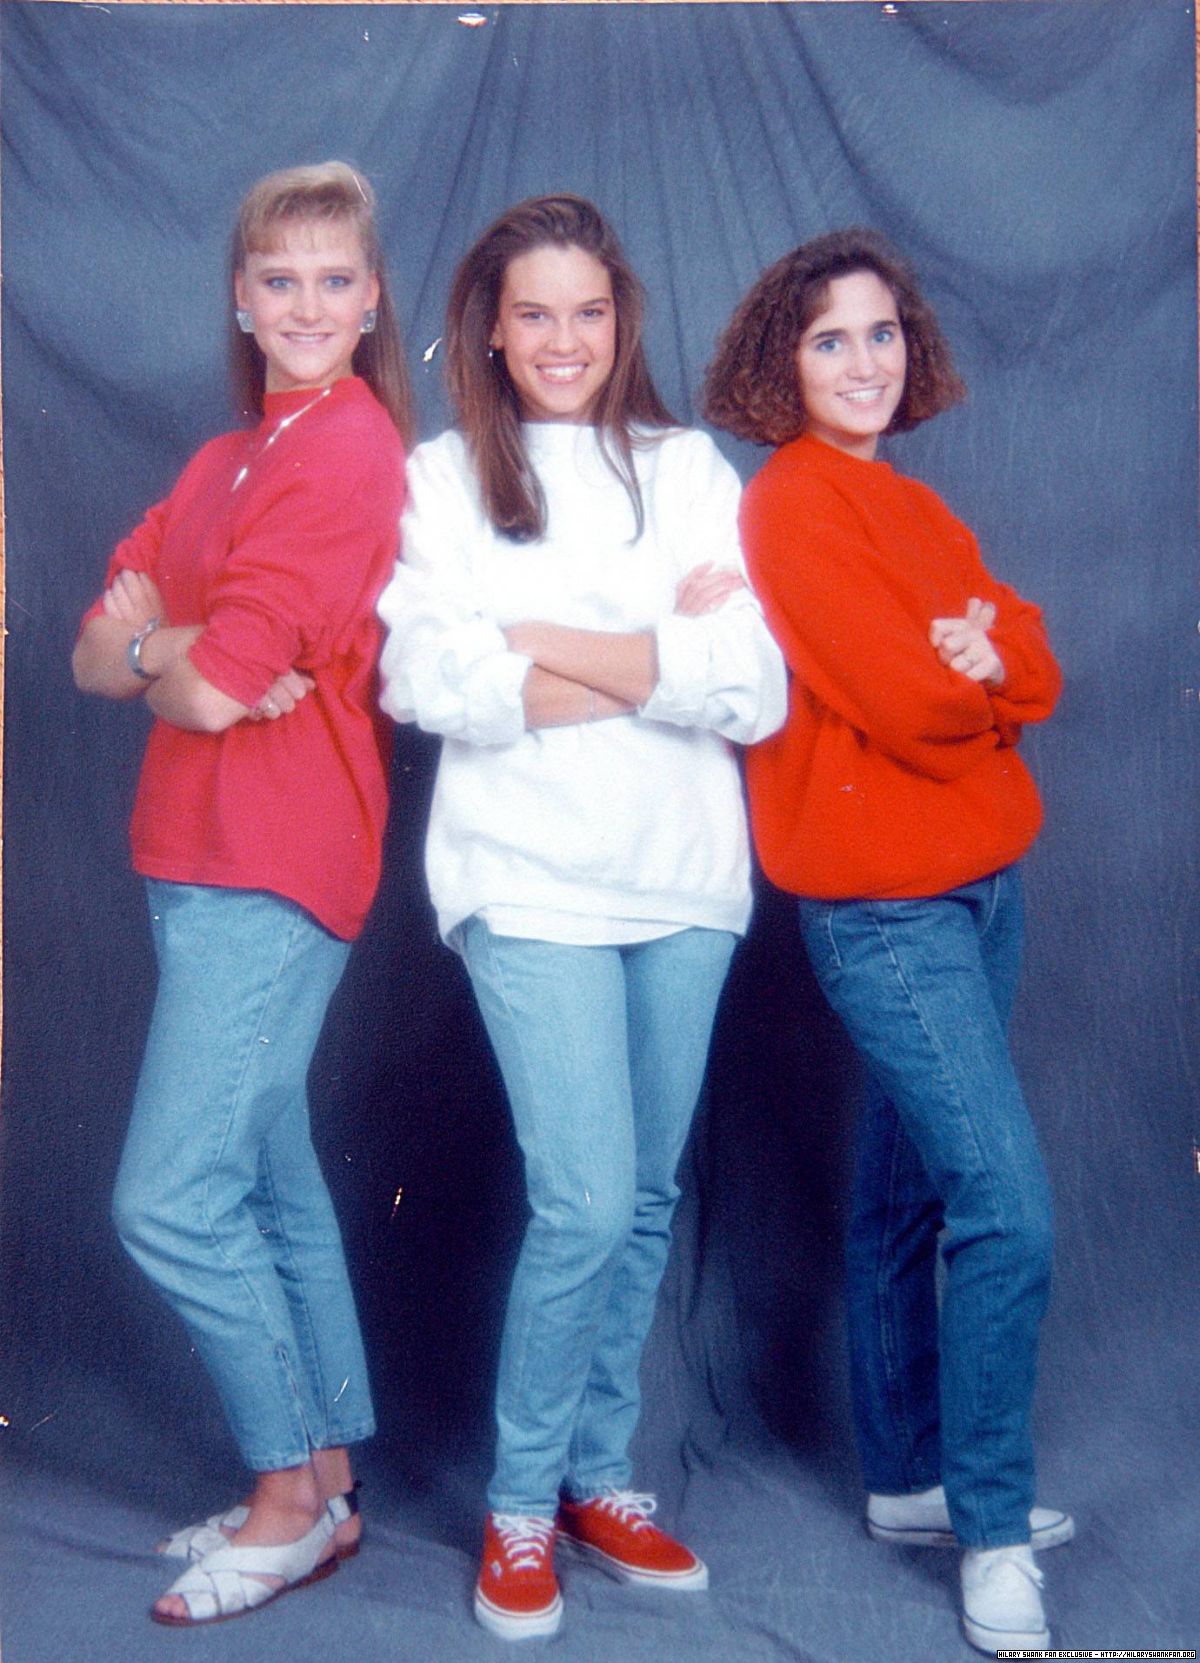 At age 17 with her high school friends Heather and Kristin posing for a photo.
